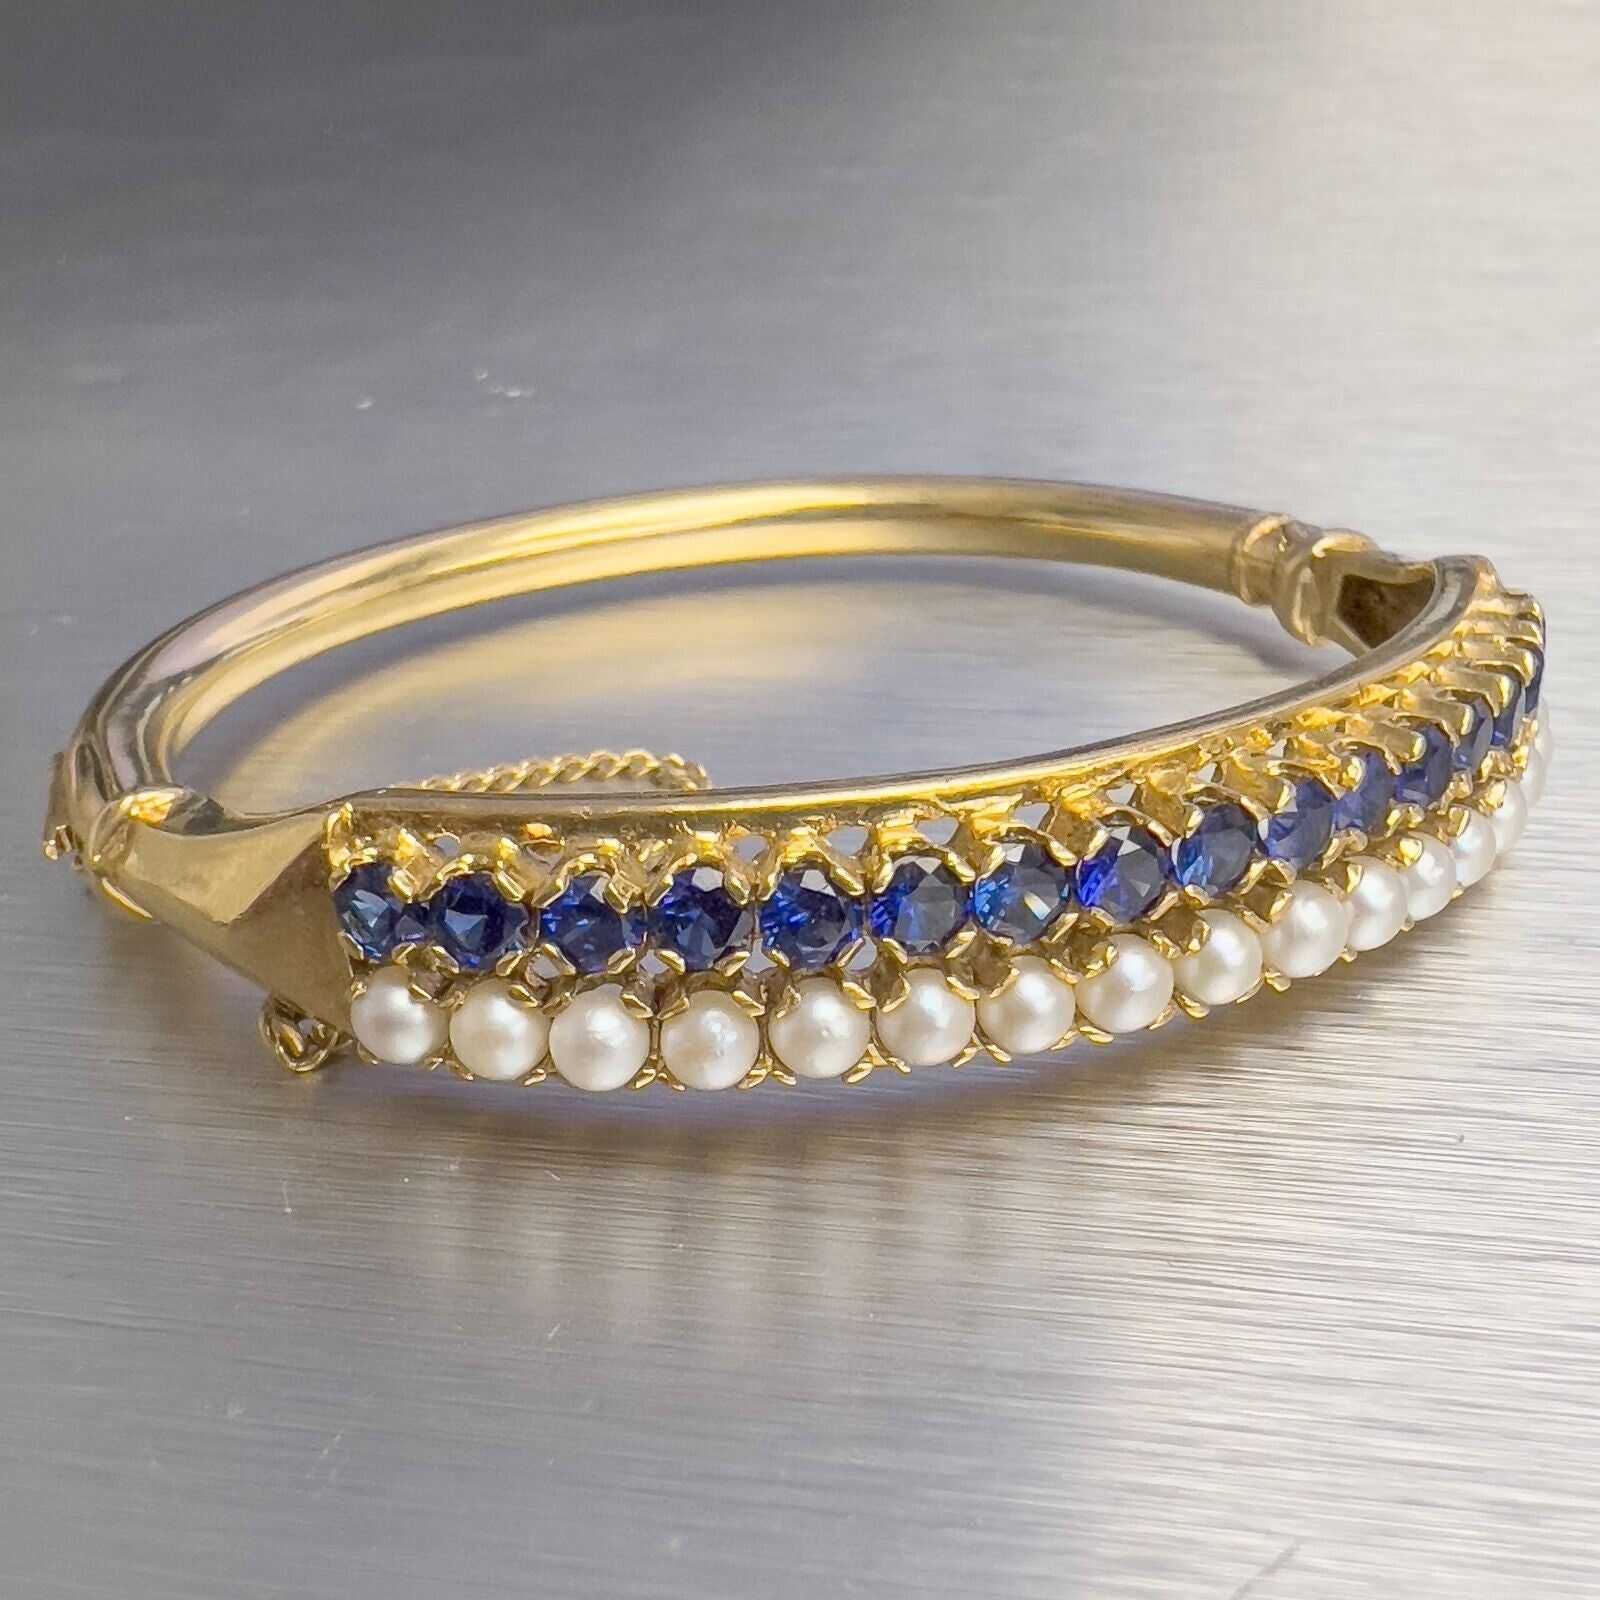 Antique Victorian 14k Yellow Gold Pearl Sapphire Hinged Bangle Bracelet 6.5"